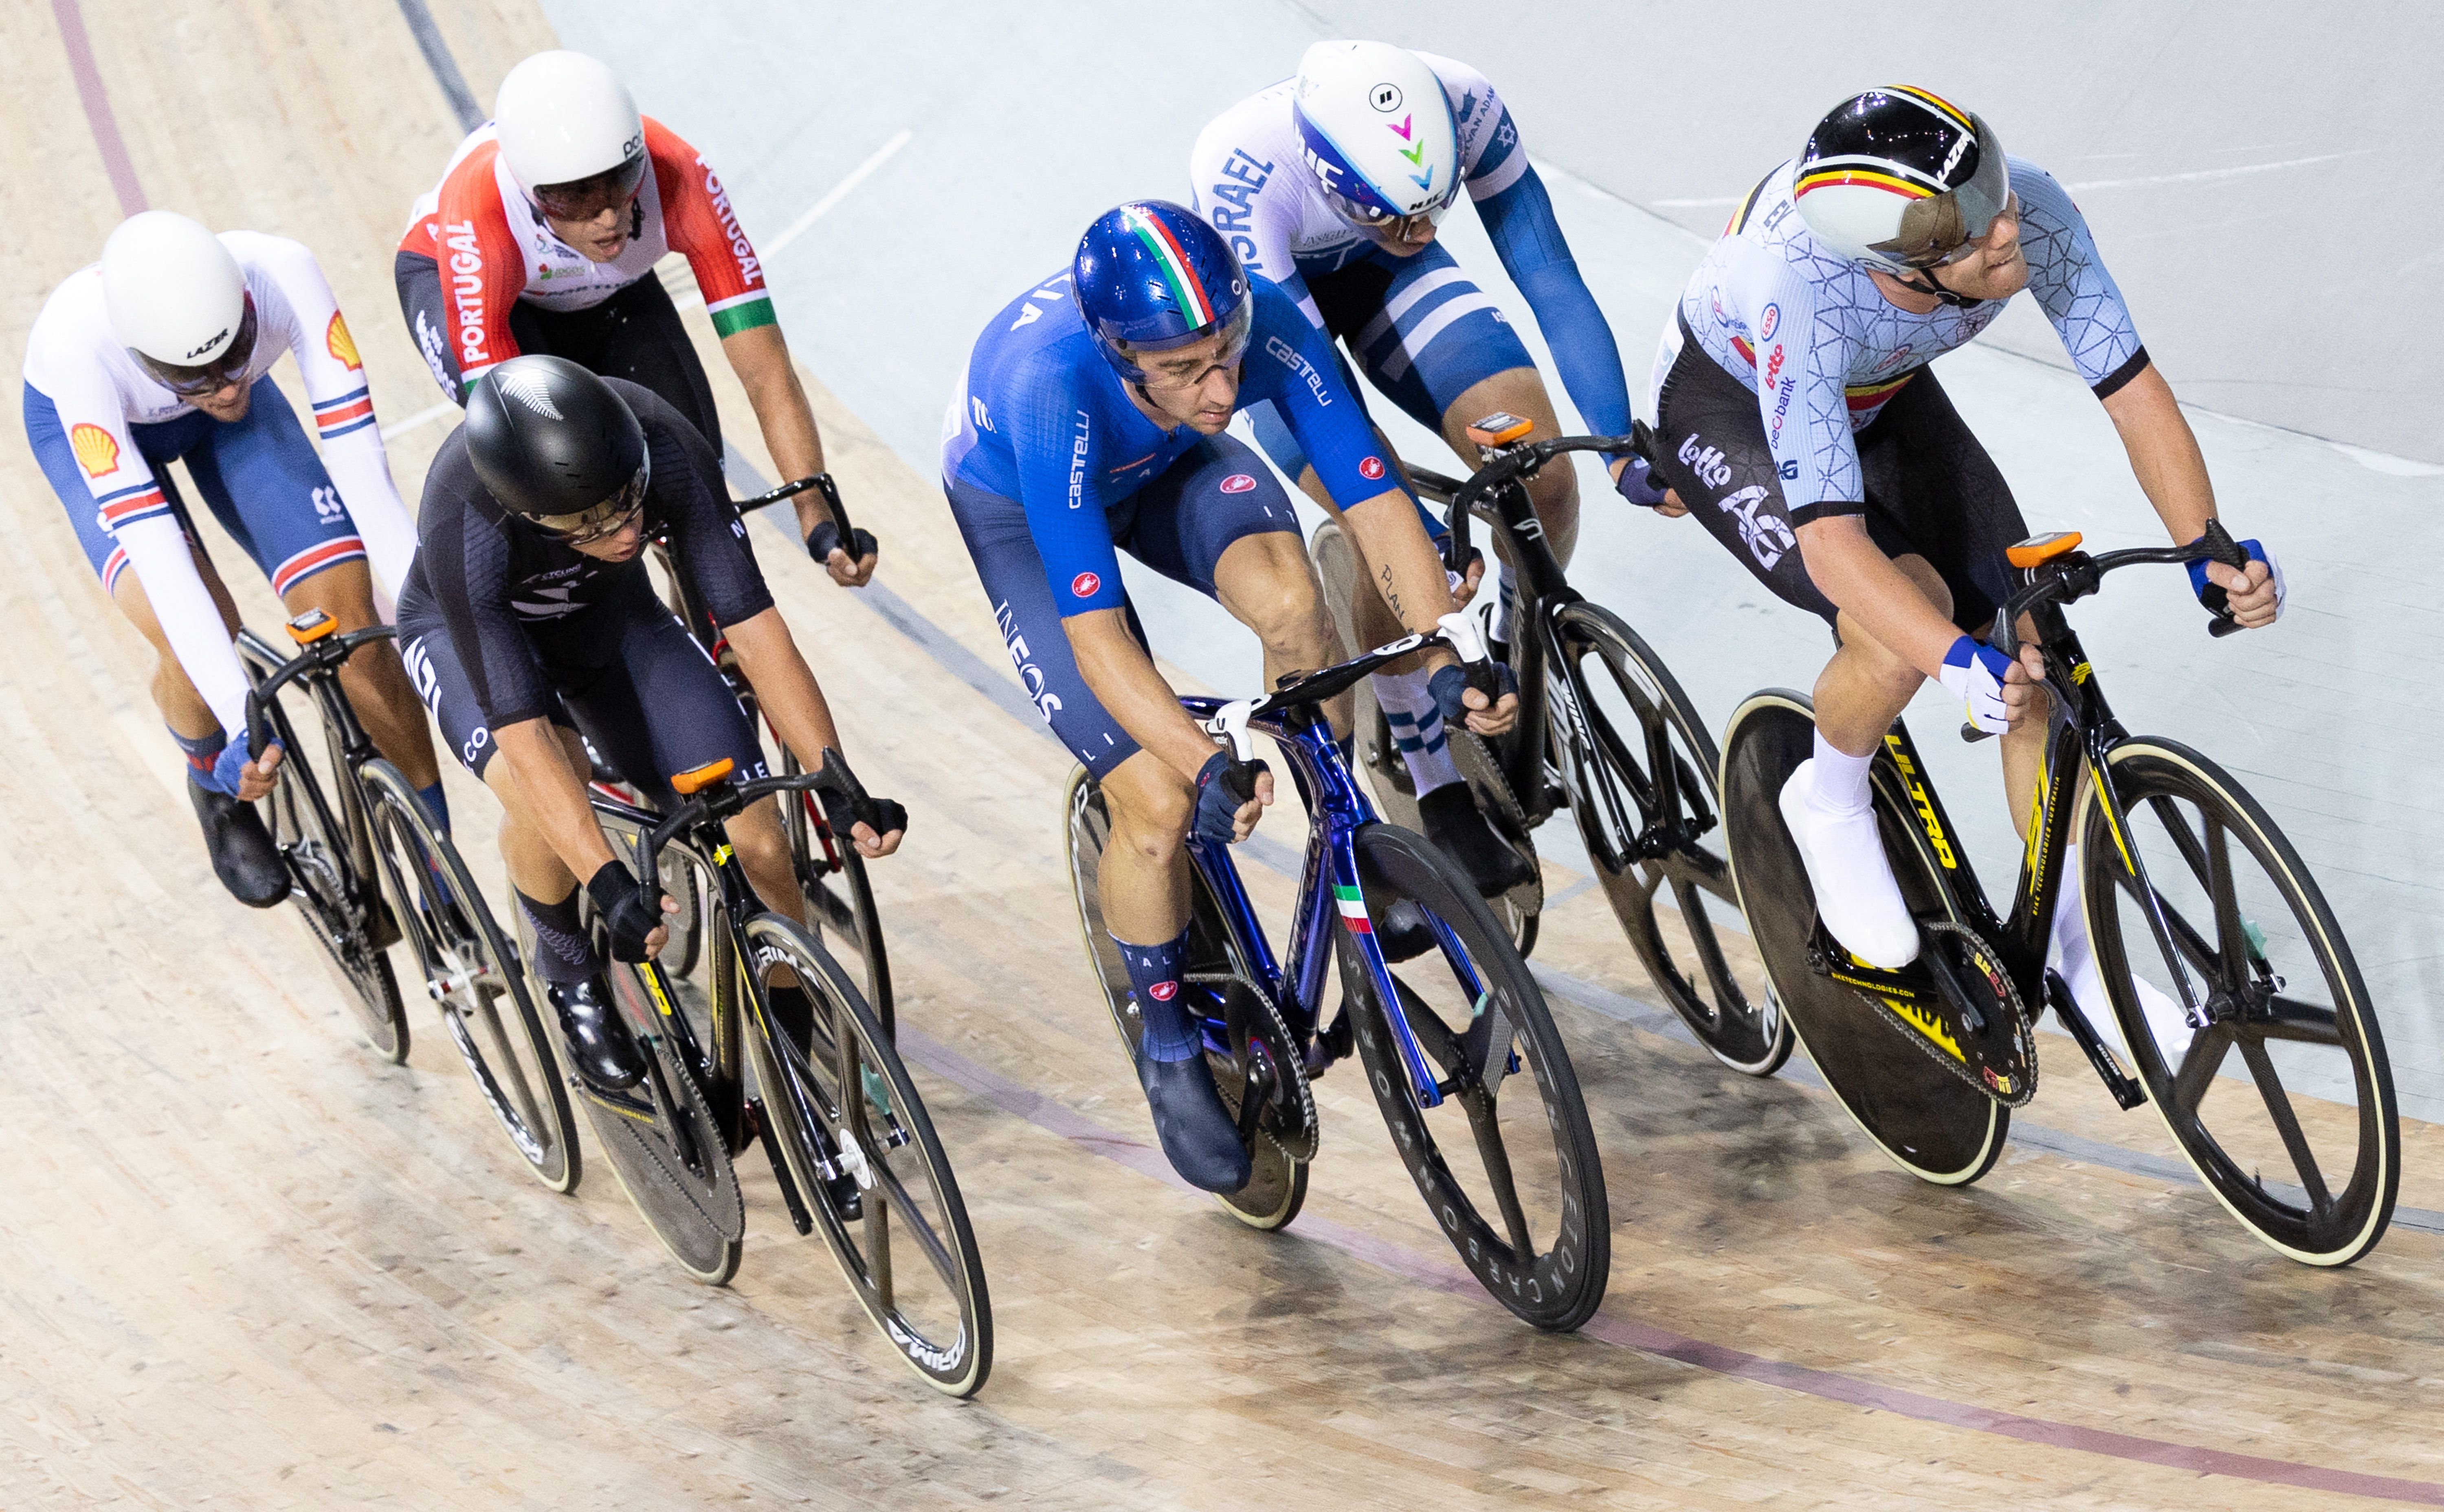 uci world championships how to watch